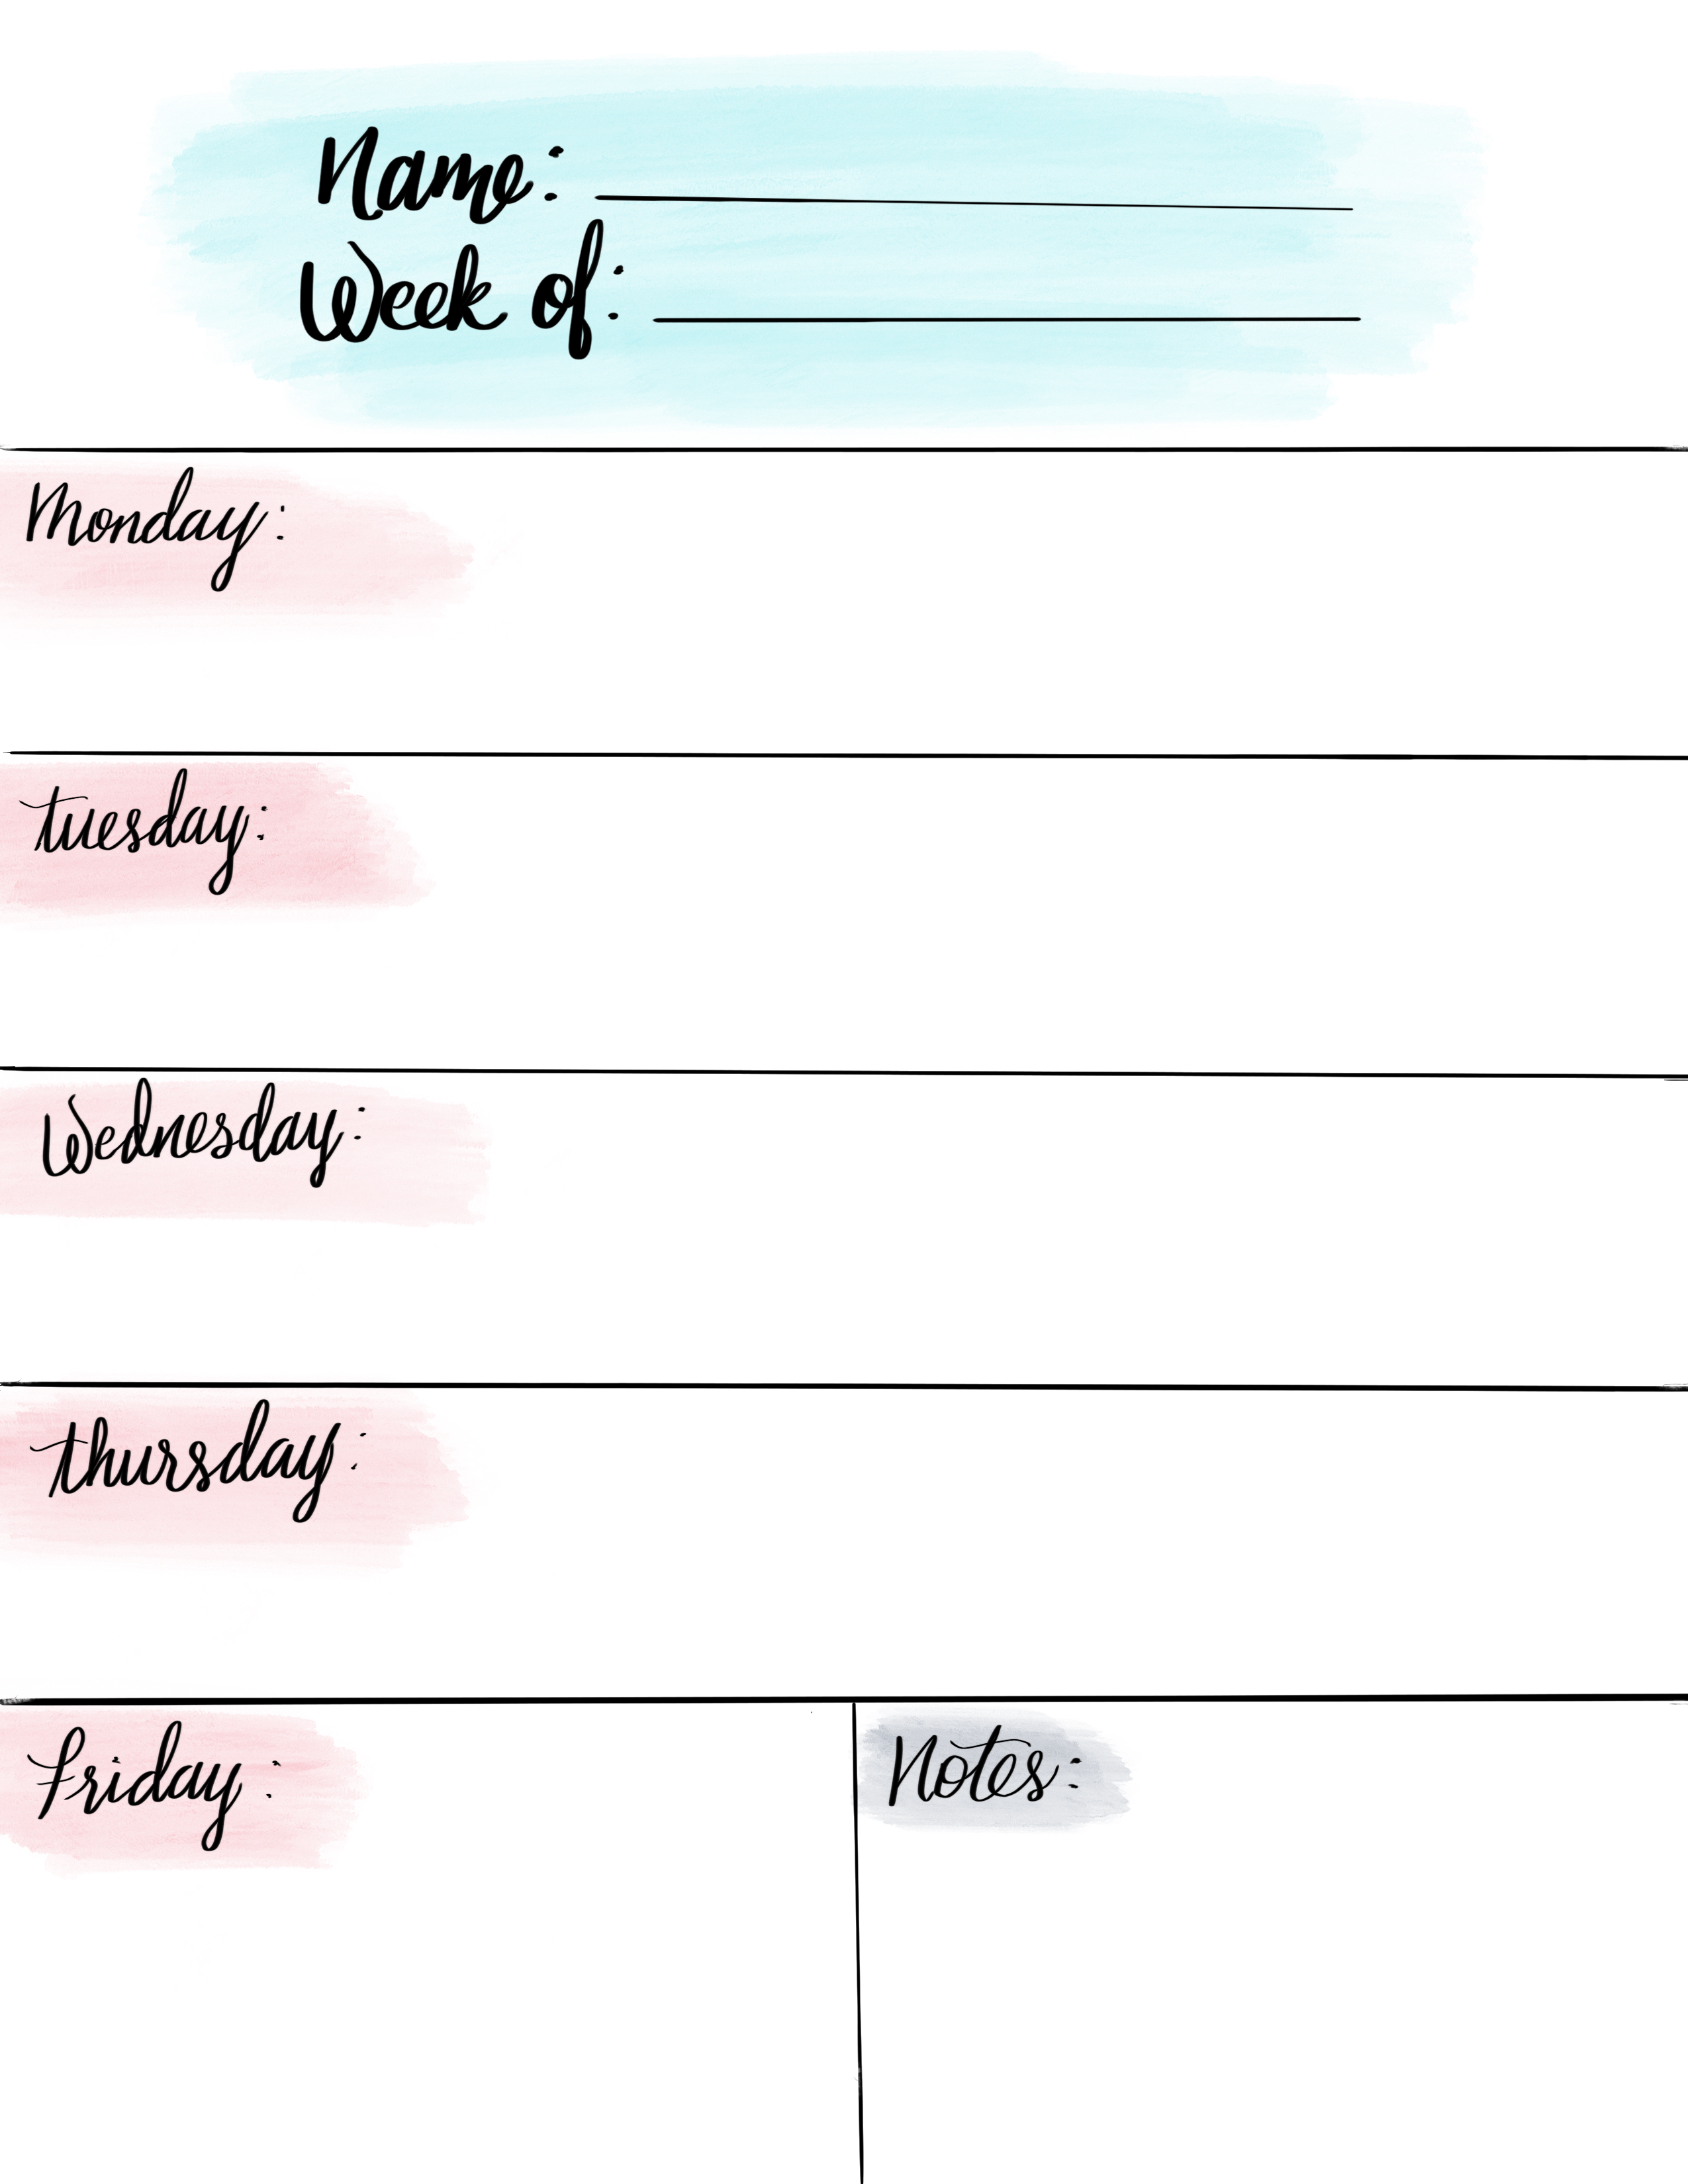 Blank weekly for 1 child